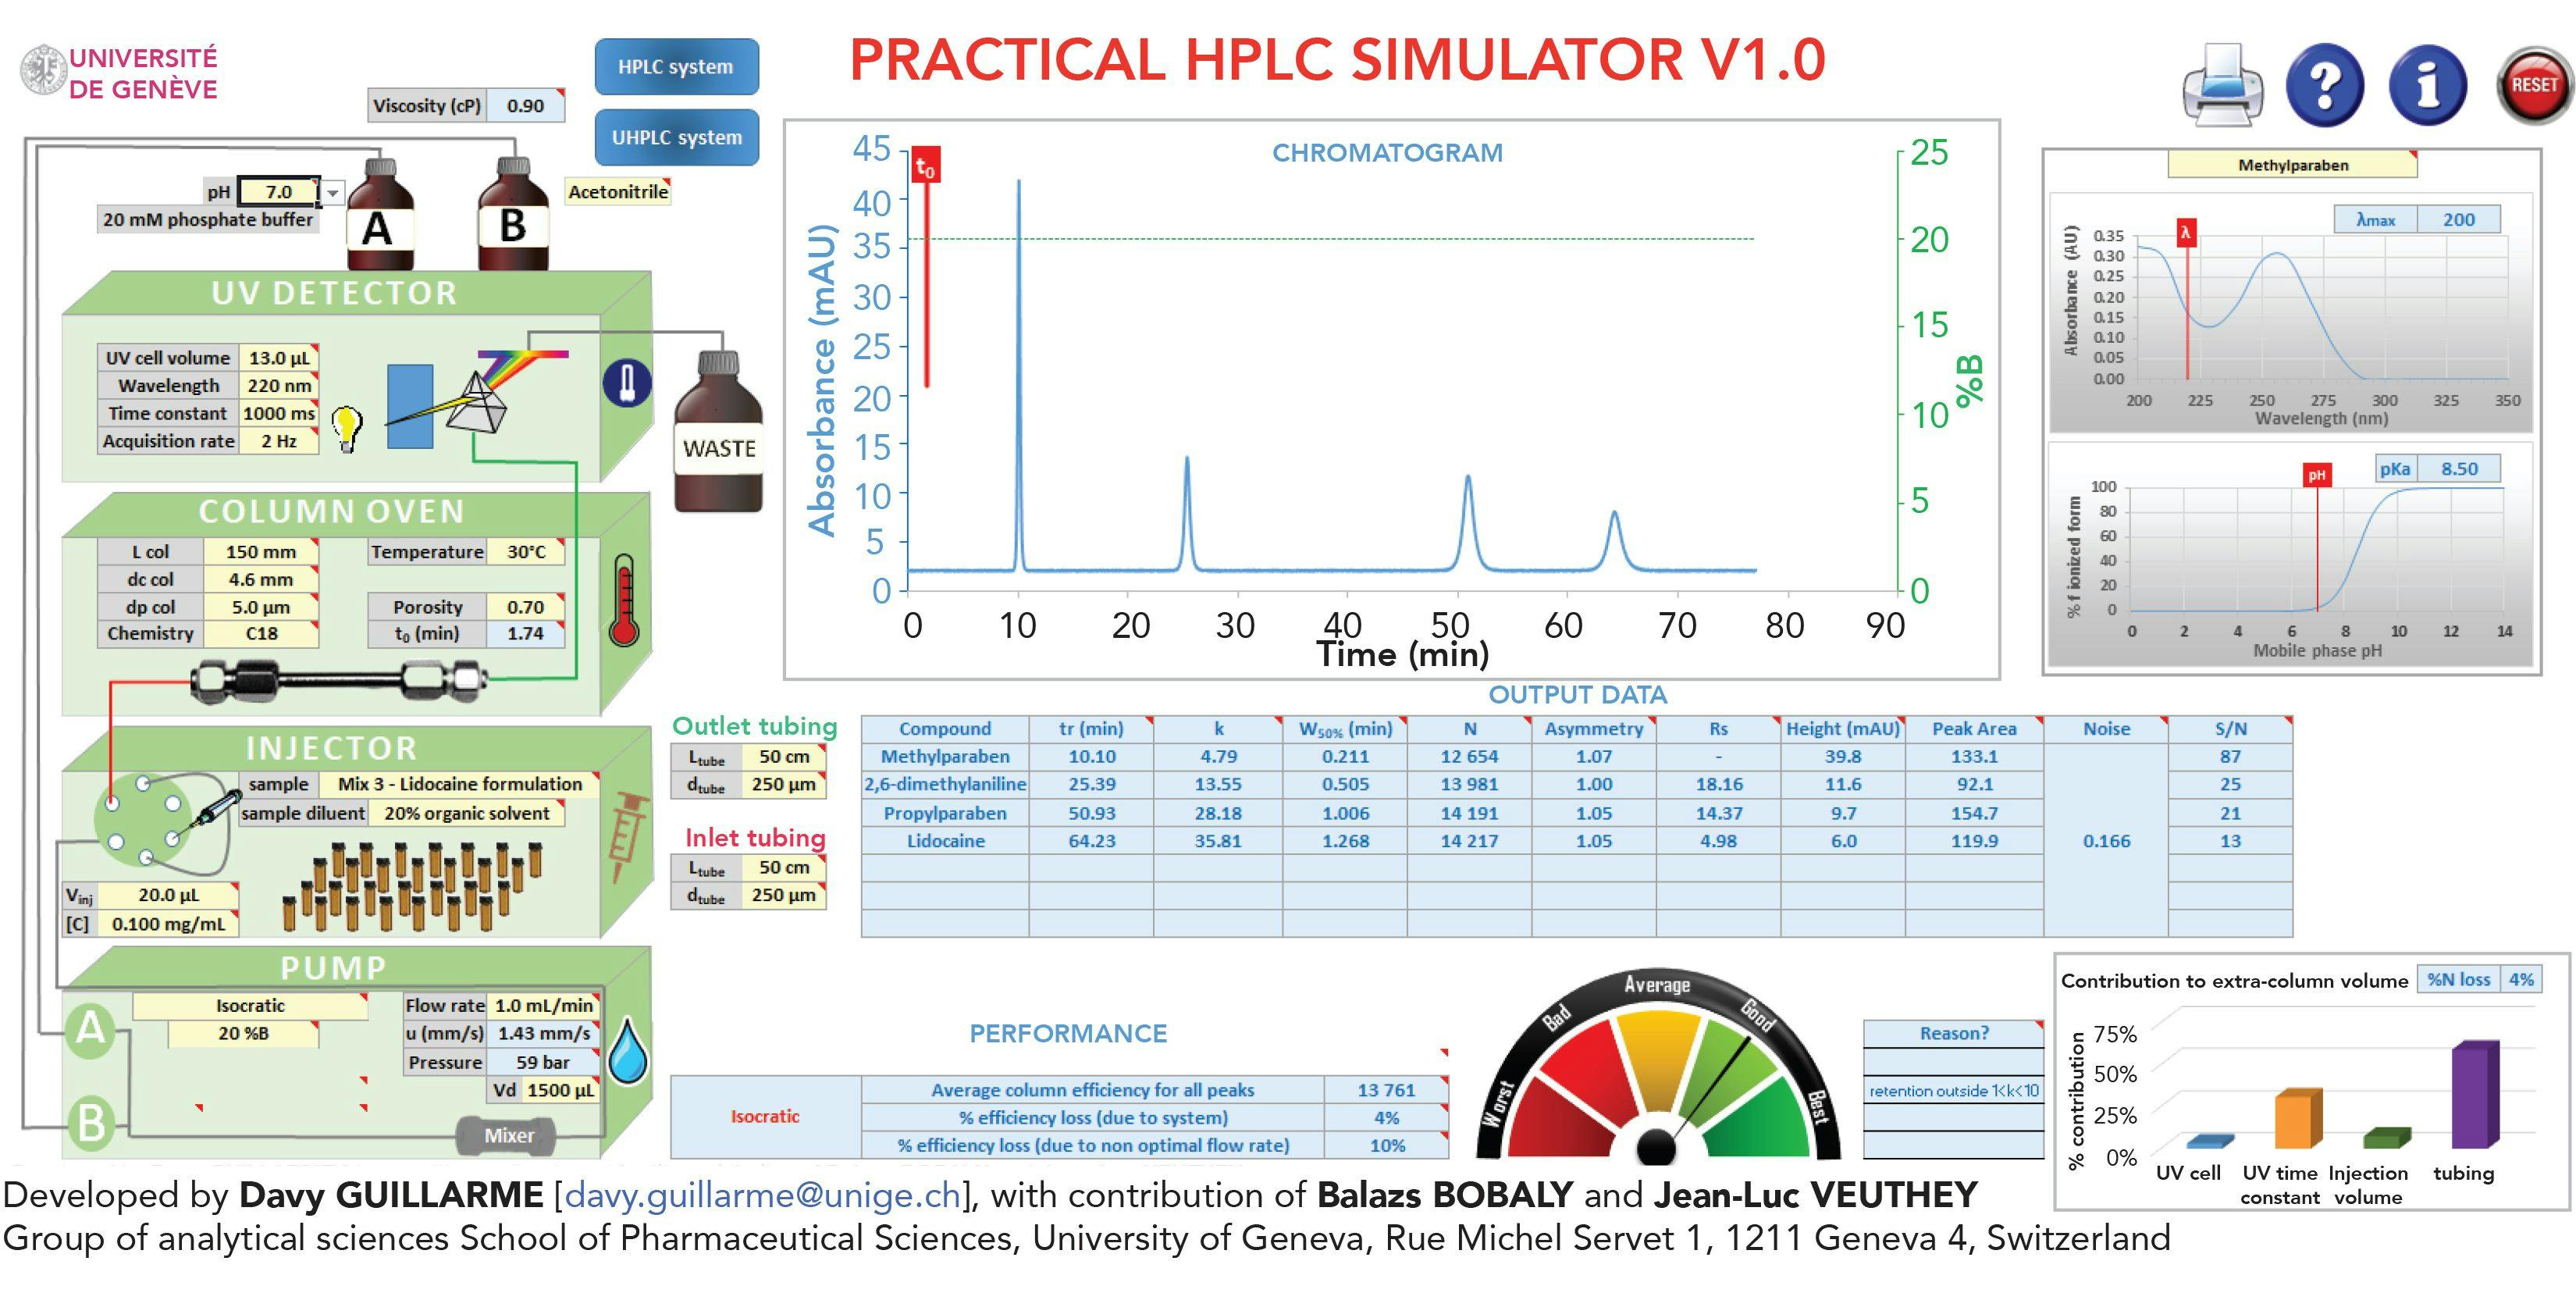 FIGURE 1: Screenshot showing features of the Excel tool “Practical HPLC calculator.”